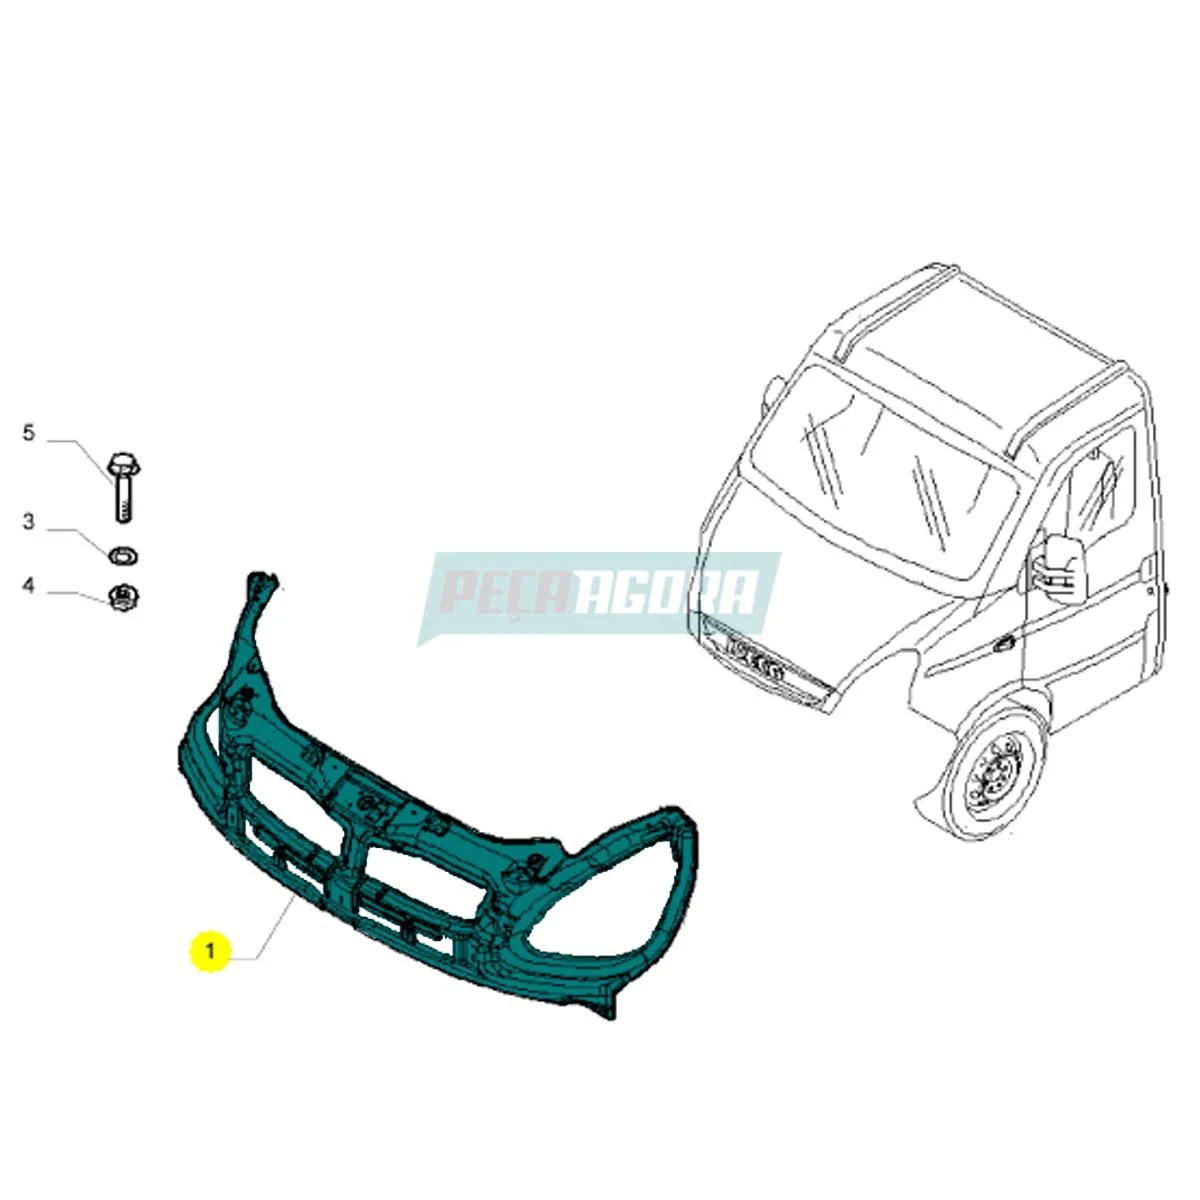 PAINEL FRONTAL MOTOR PARA IVECO DAILY TODAS APOS 2008 35S14 A 70C16 (3800059.)